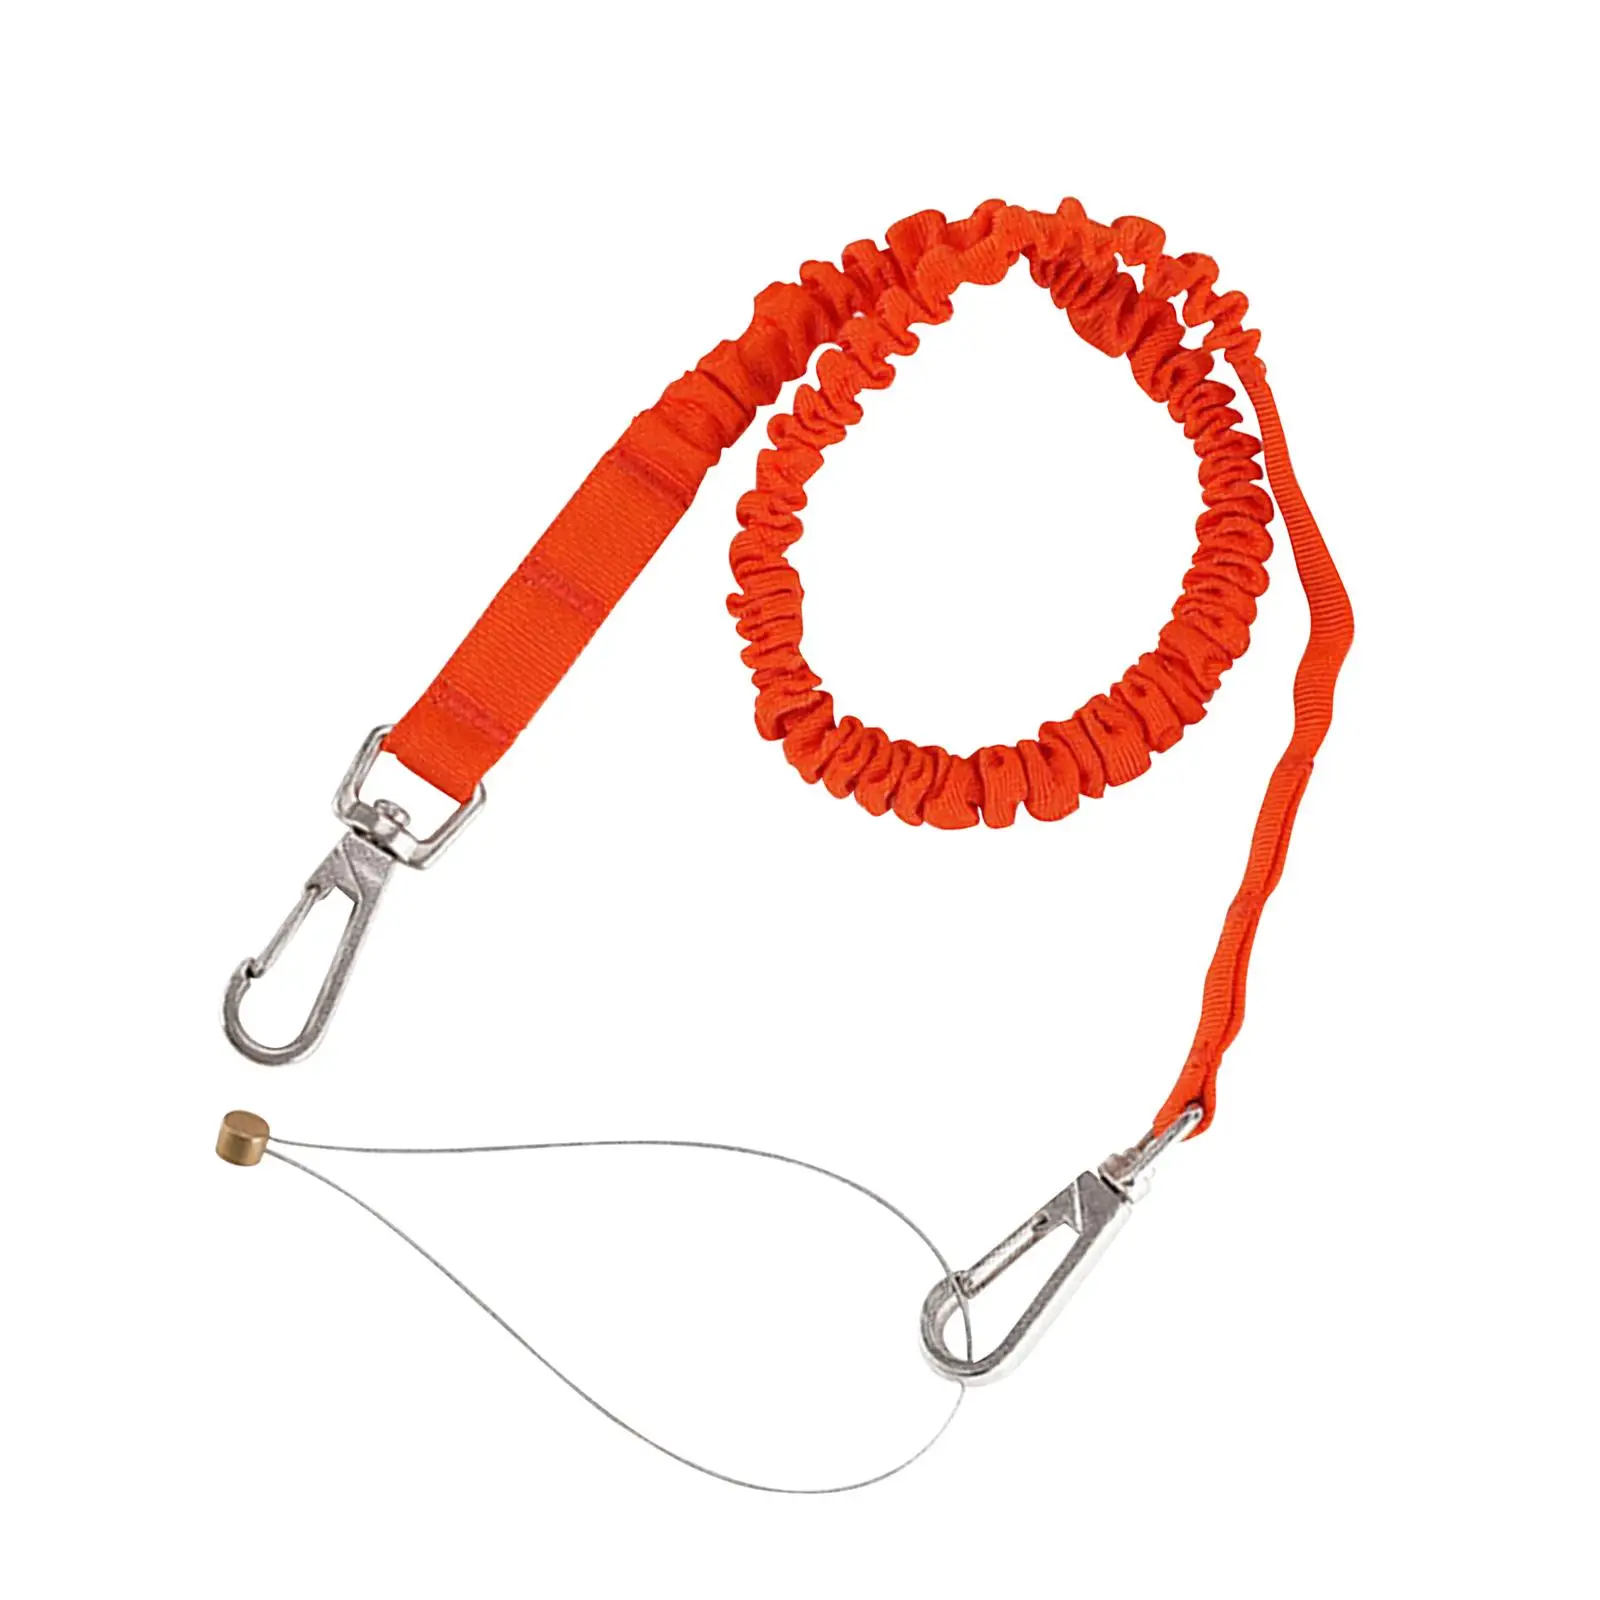 Climbing Restraint Lanyard Fall Arrest Protection with Two Buckles Harness Belt